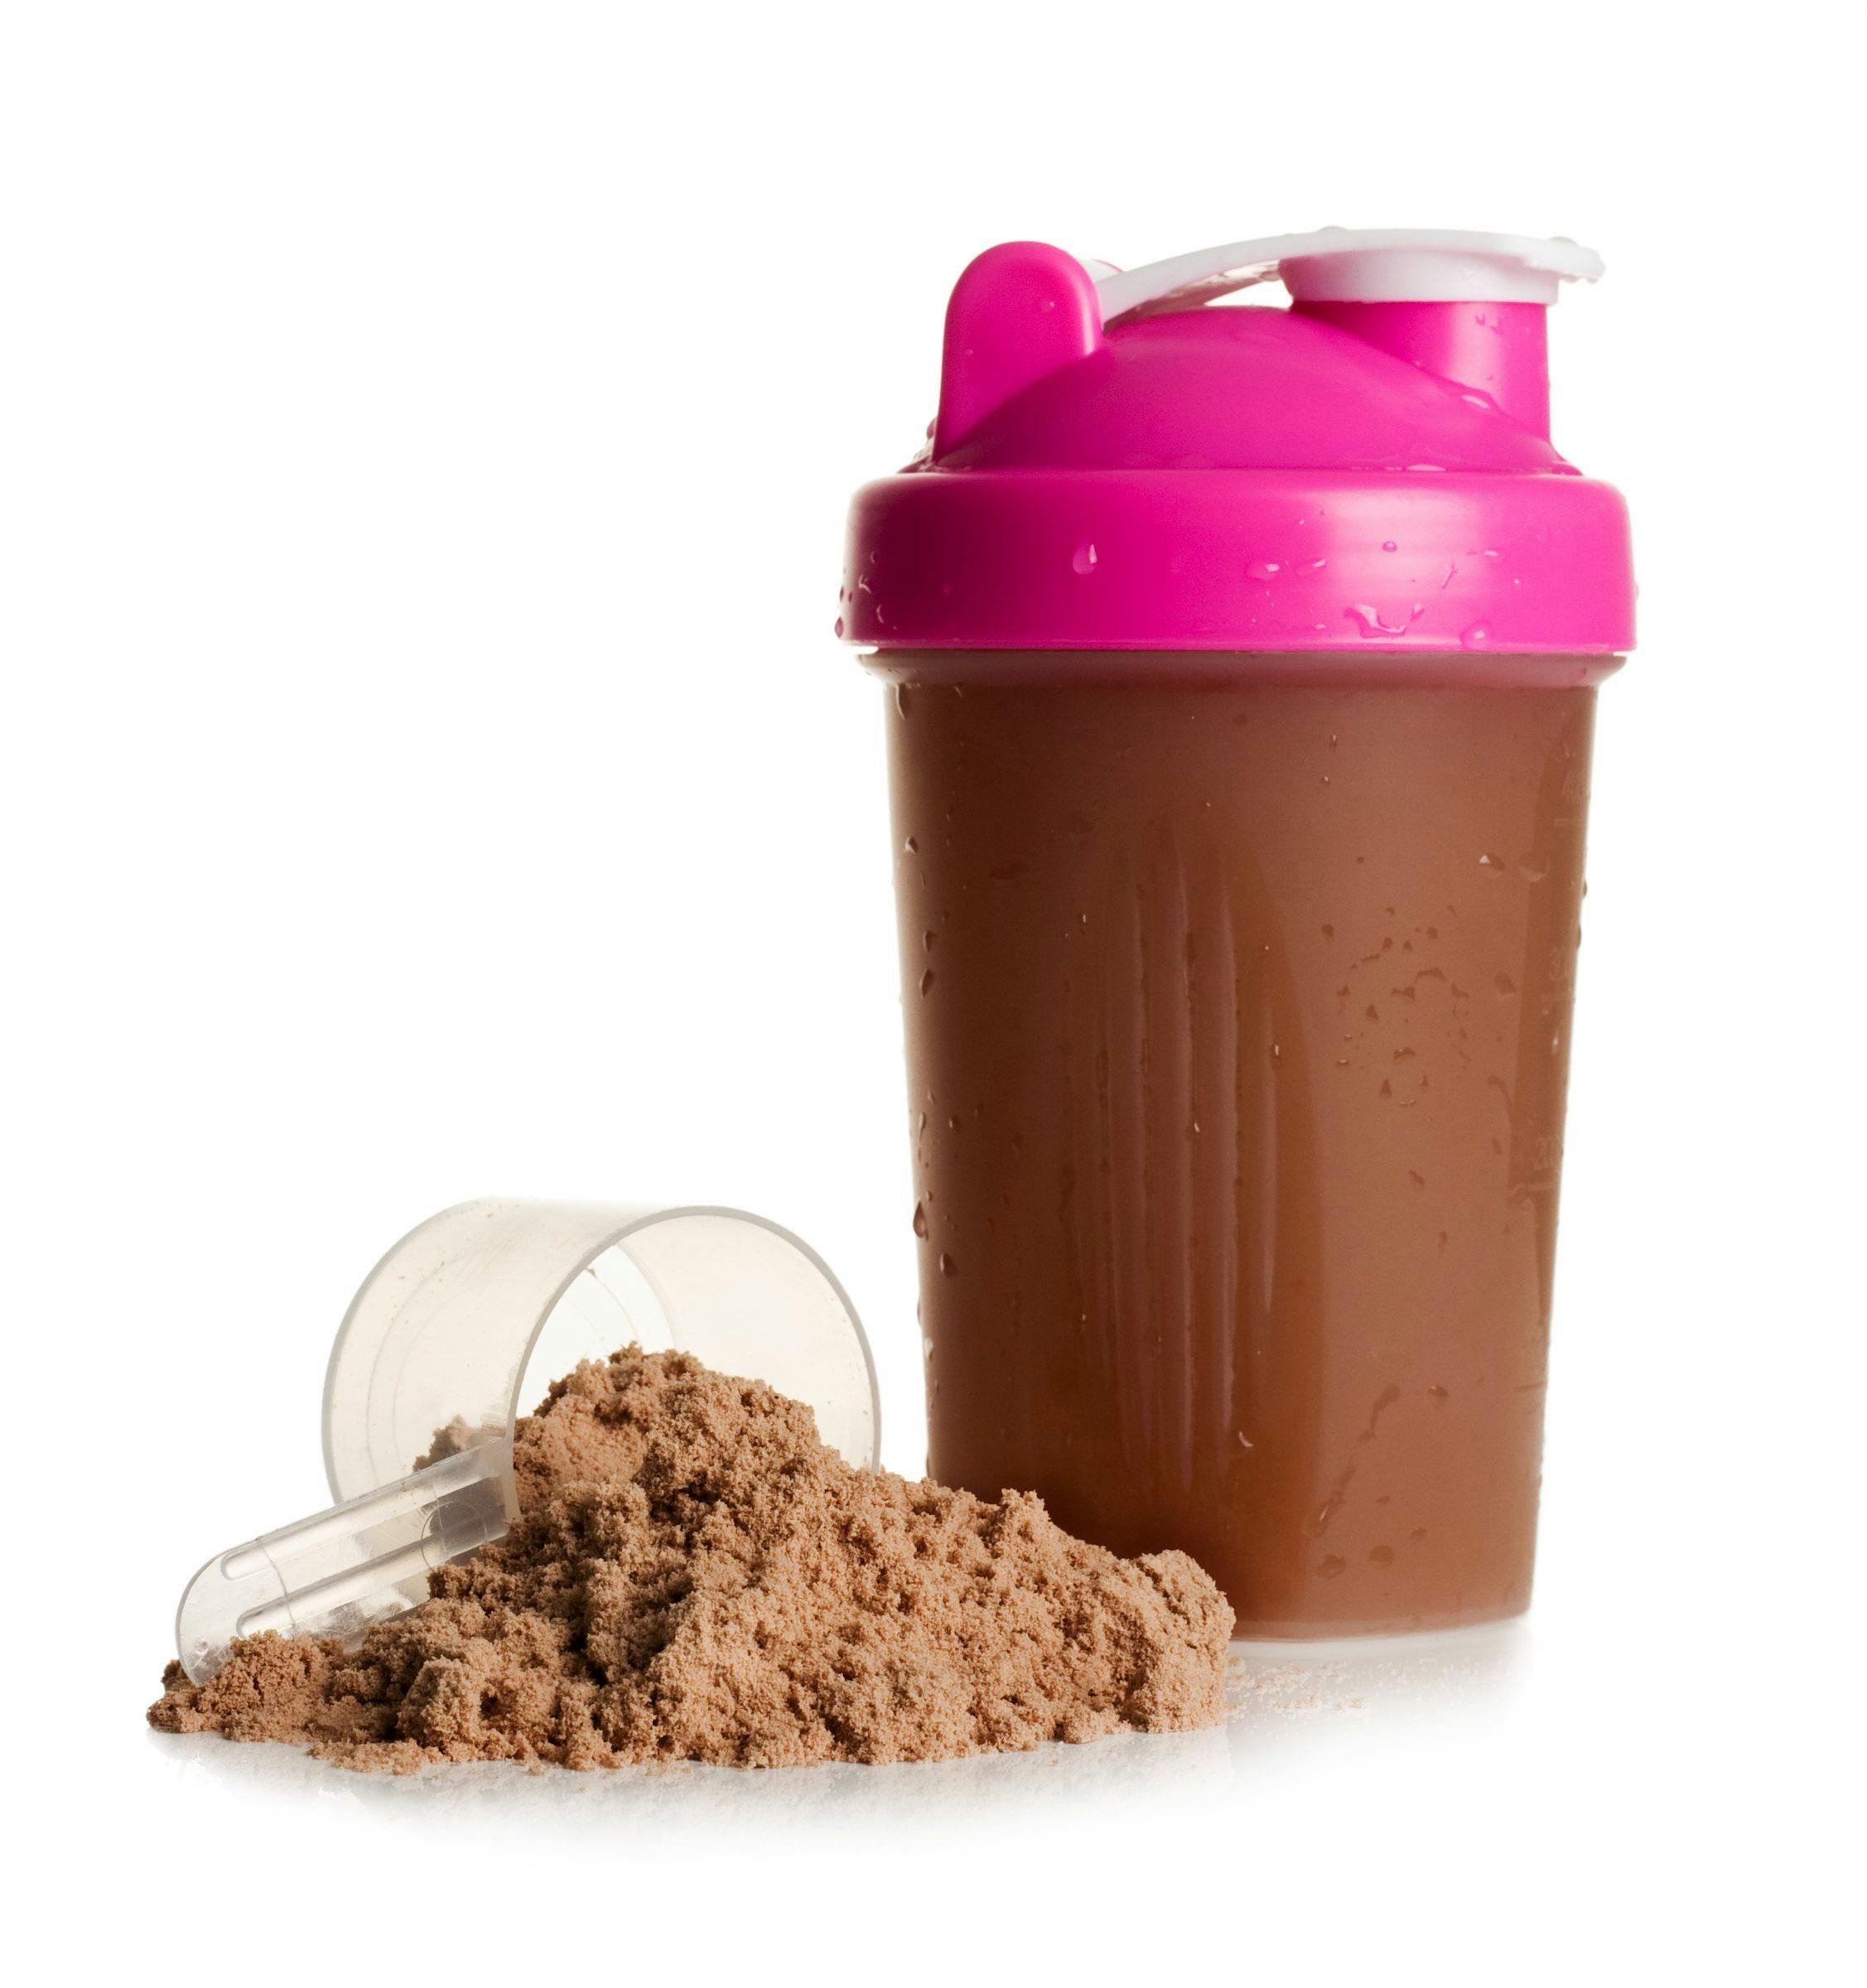 Fastest-Dissolving Protein Powder on the Market Disperses in Just 9 Seconds, at SupplySide West